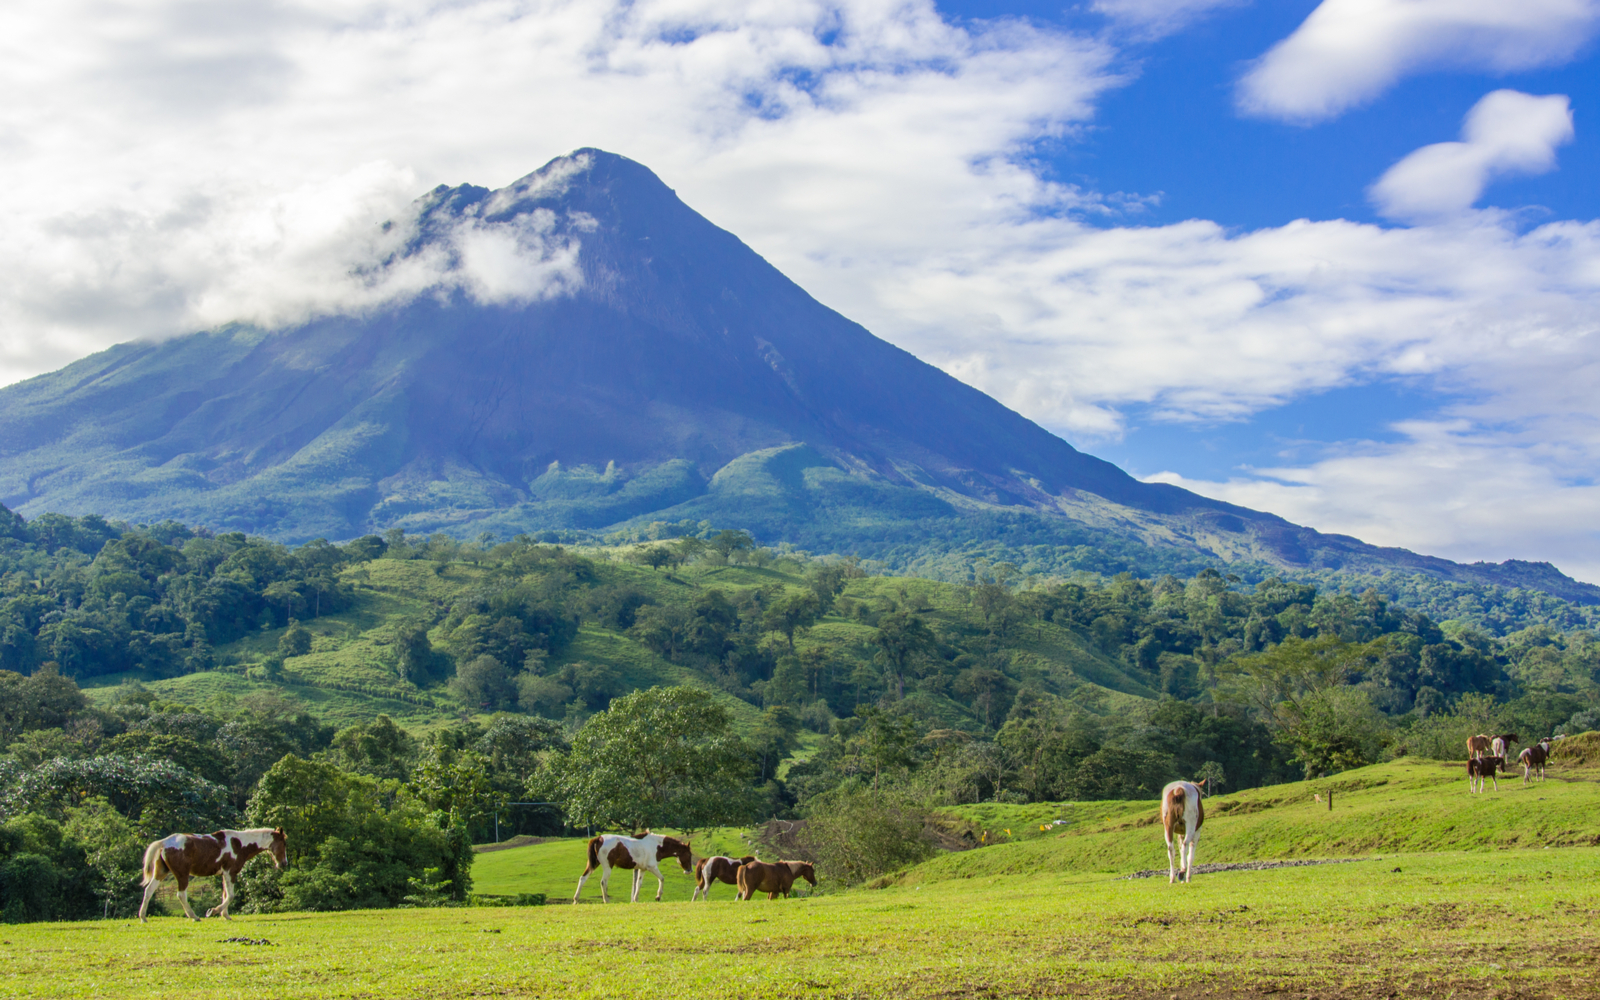 Featured image for a piece on where to stay in Costa Rica featuring a volcano in the background